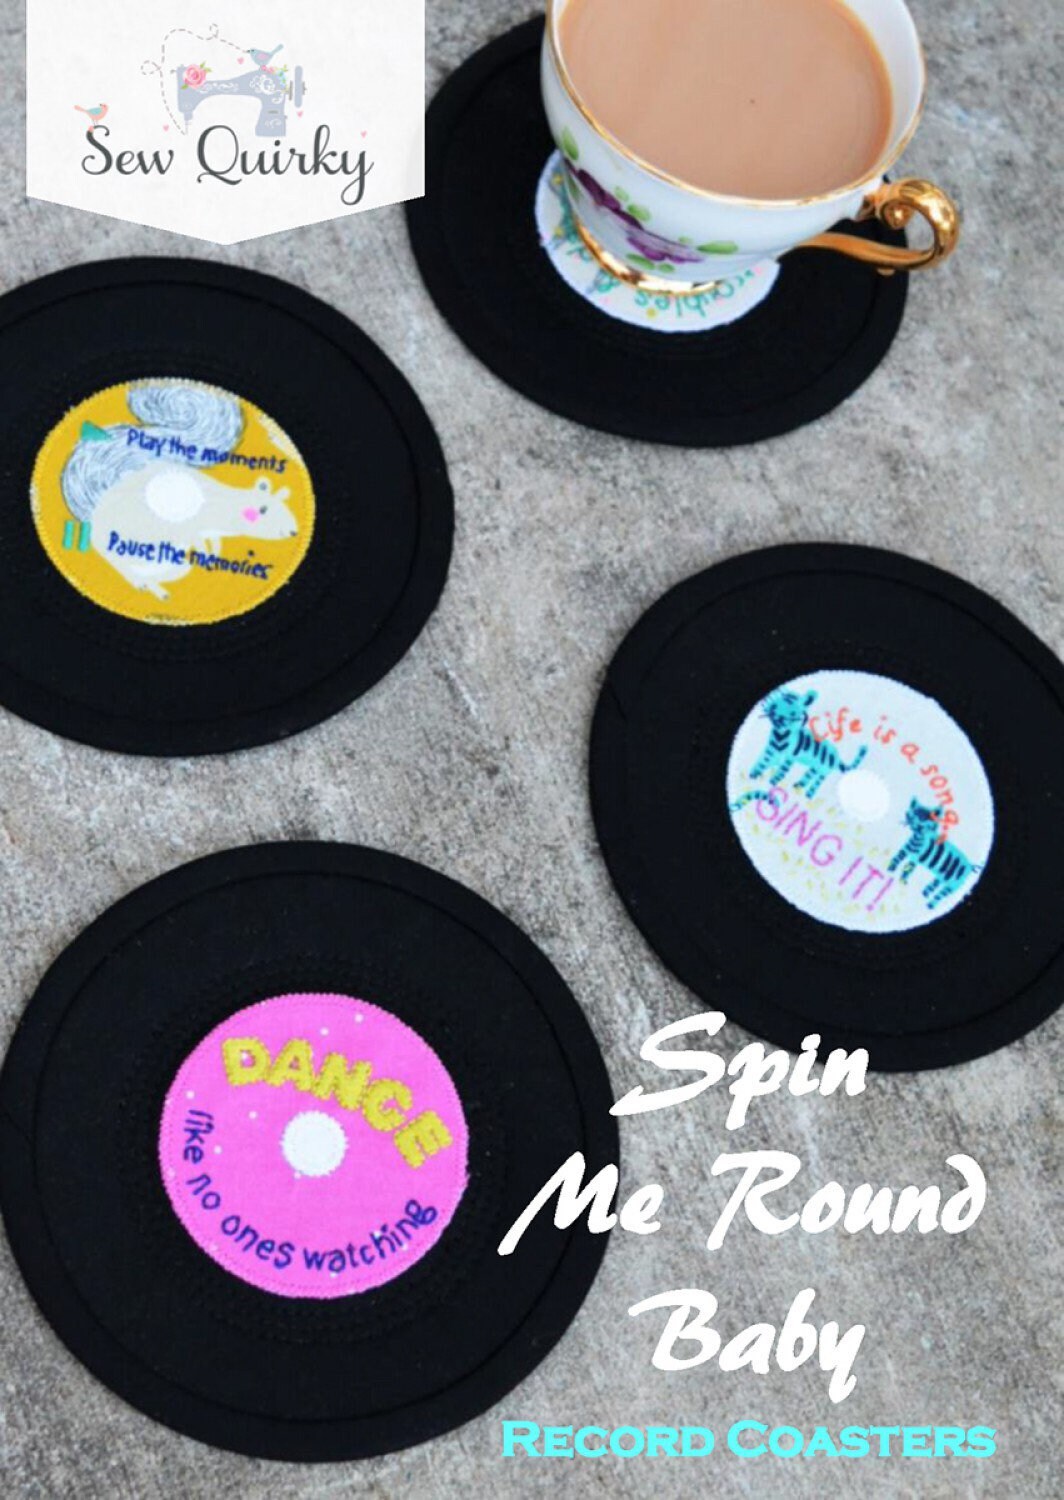 Spin Me around Baby - Sew Quirky - Mandy Murray - Appliqué Pattern - Coaster Pattern